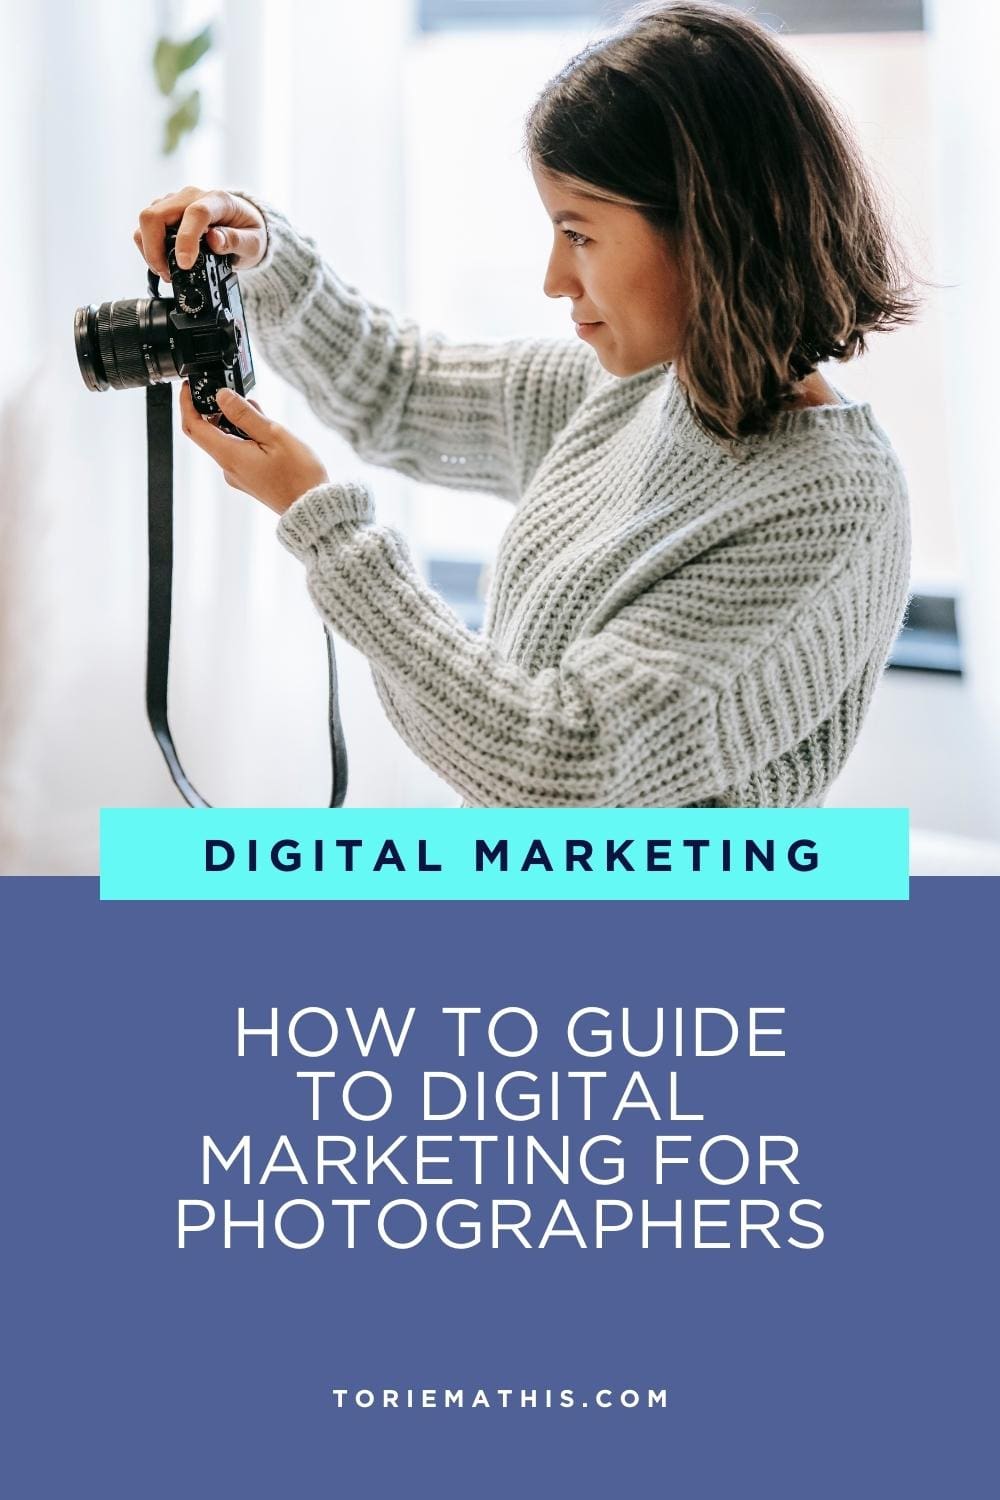 A Comprehensive Guide to Digital Marketing for Photographers